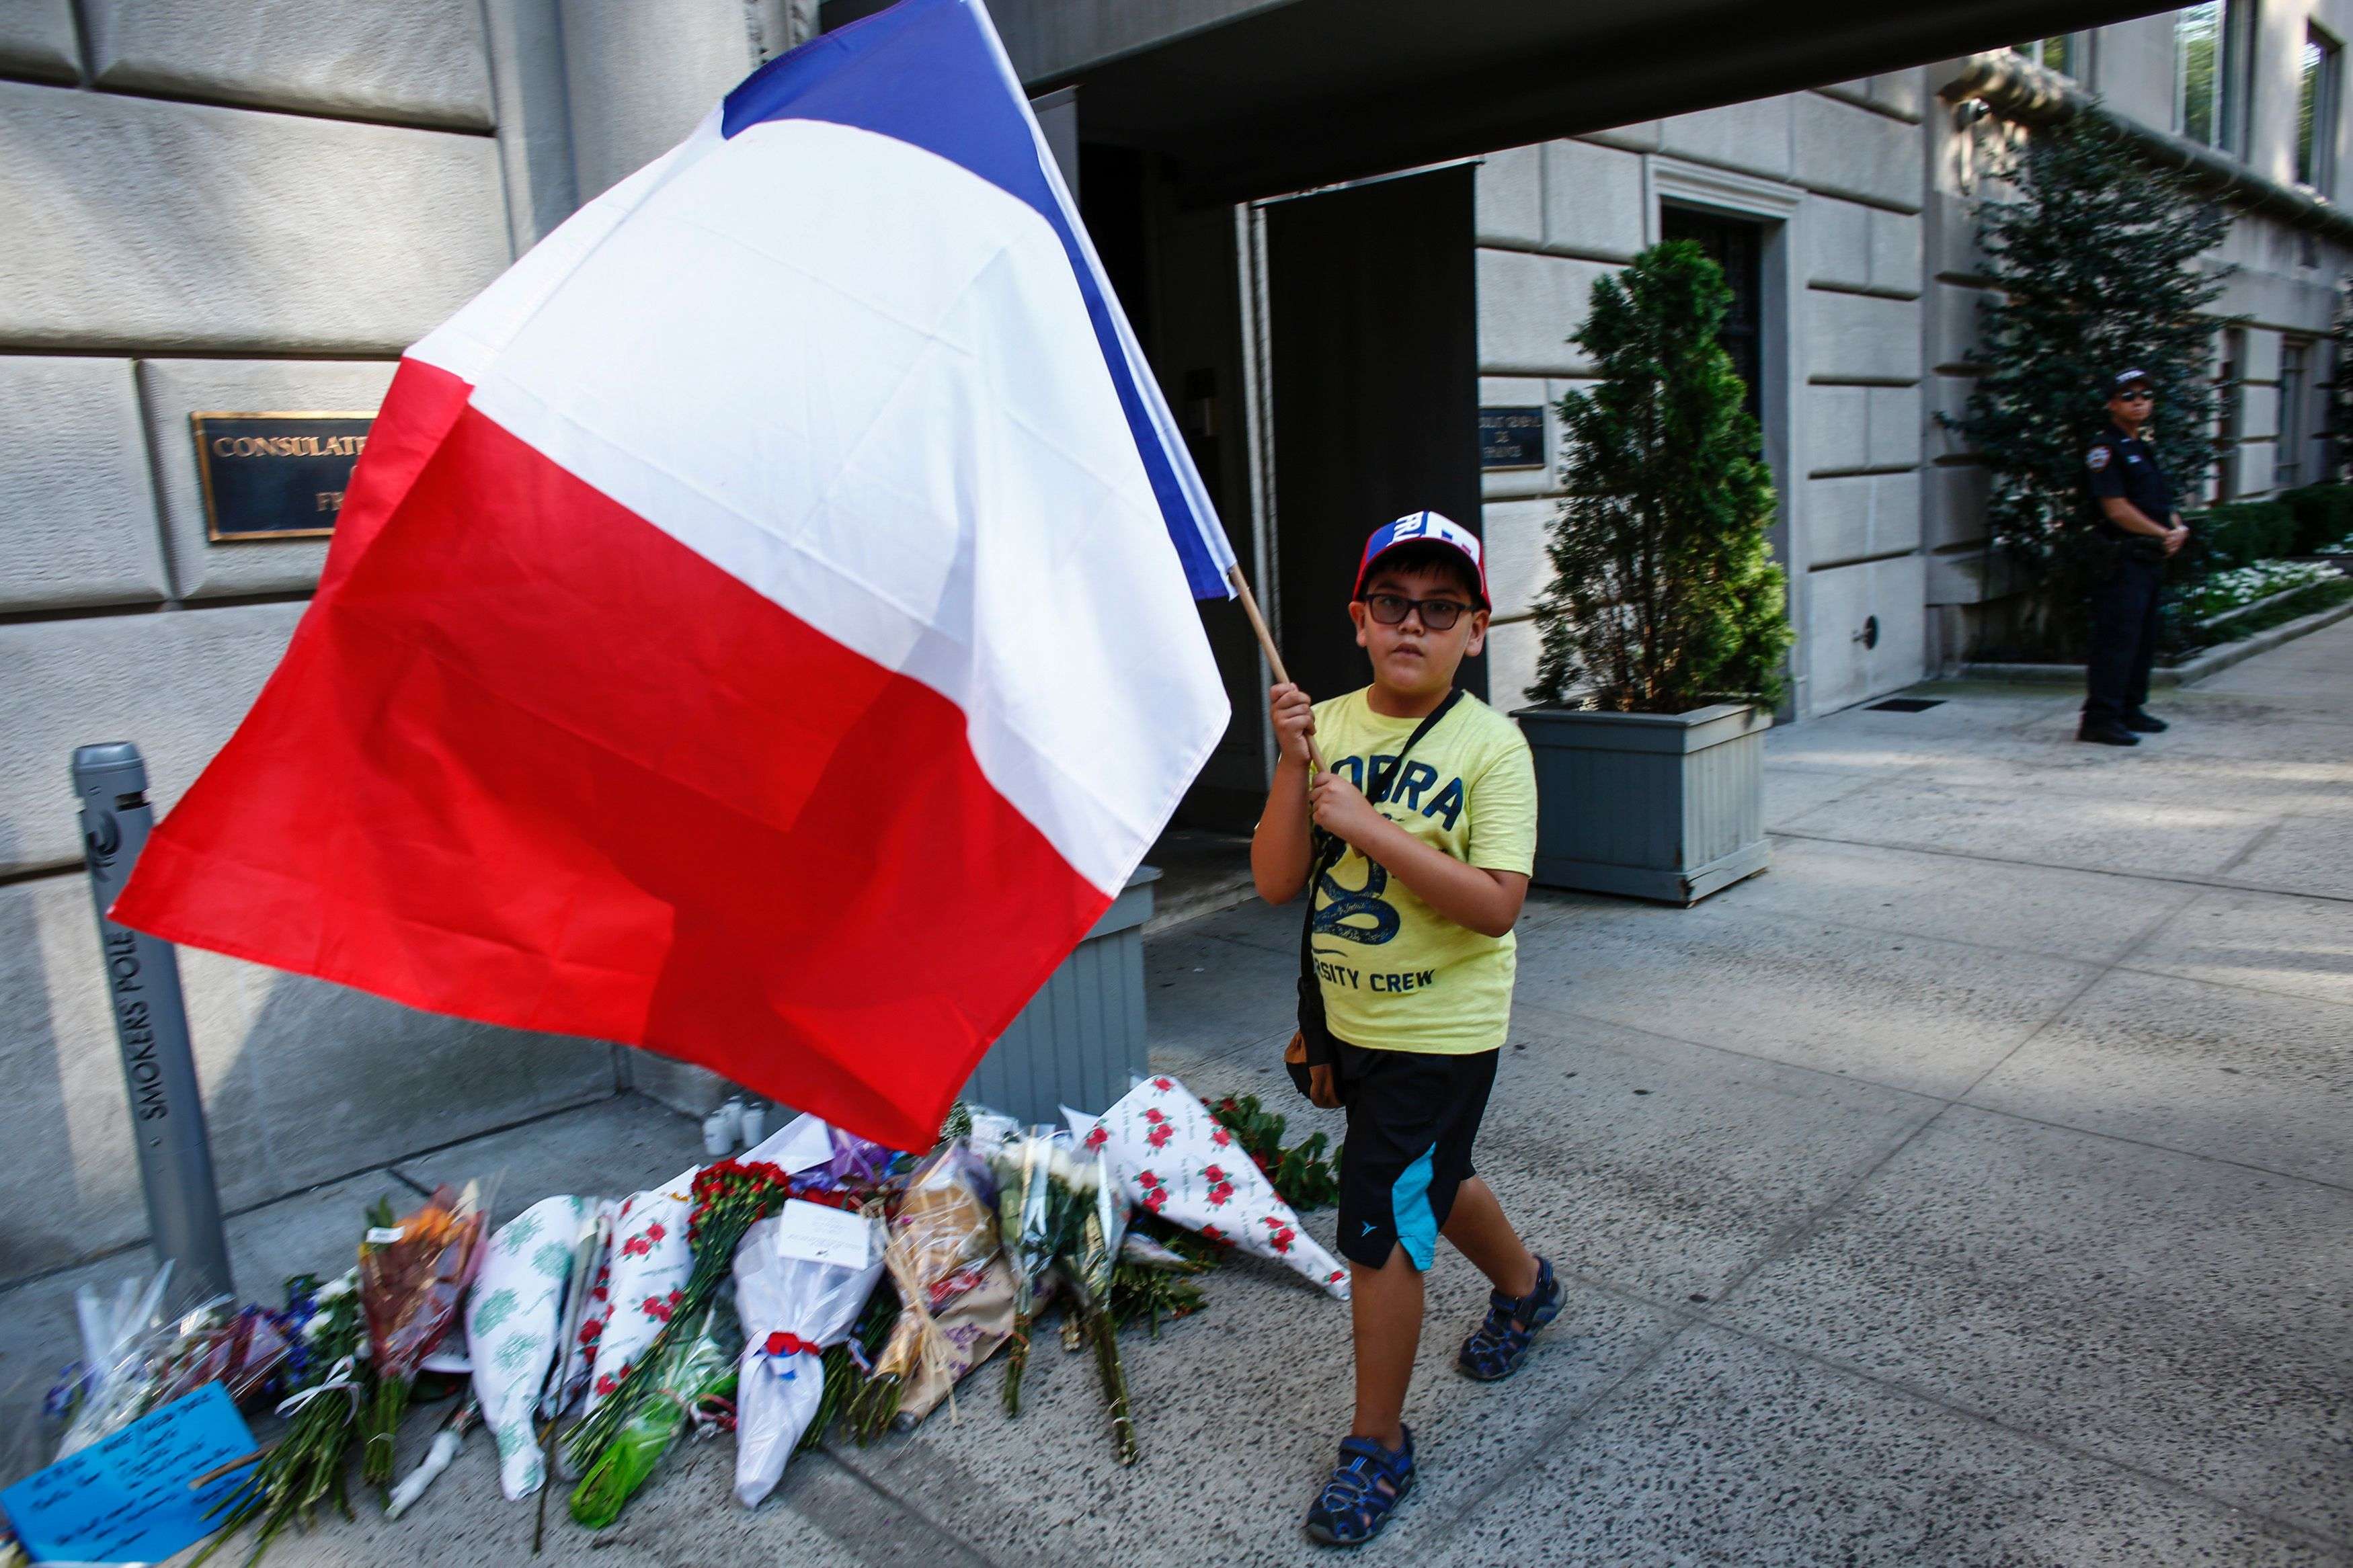 A boy carriers a French flag outside the French Consulate in New York. Photo: AFP